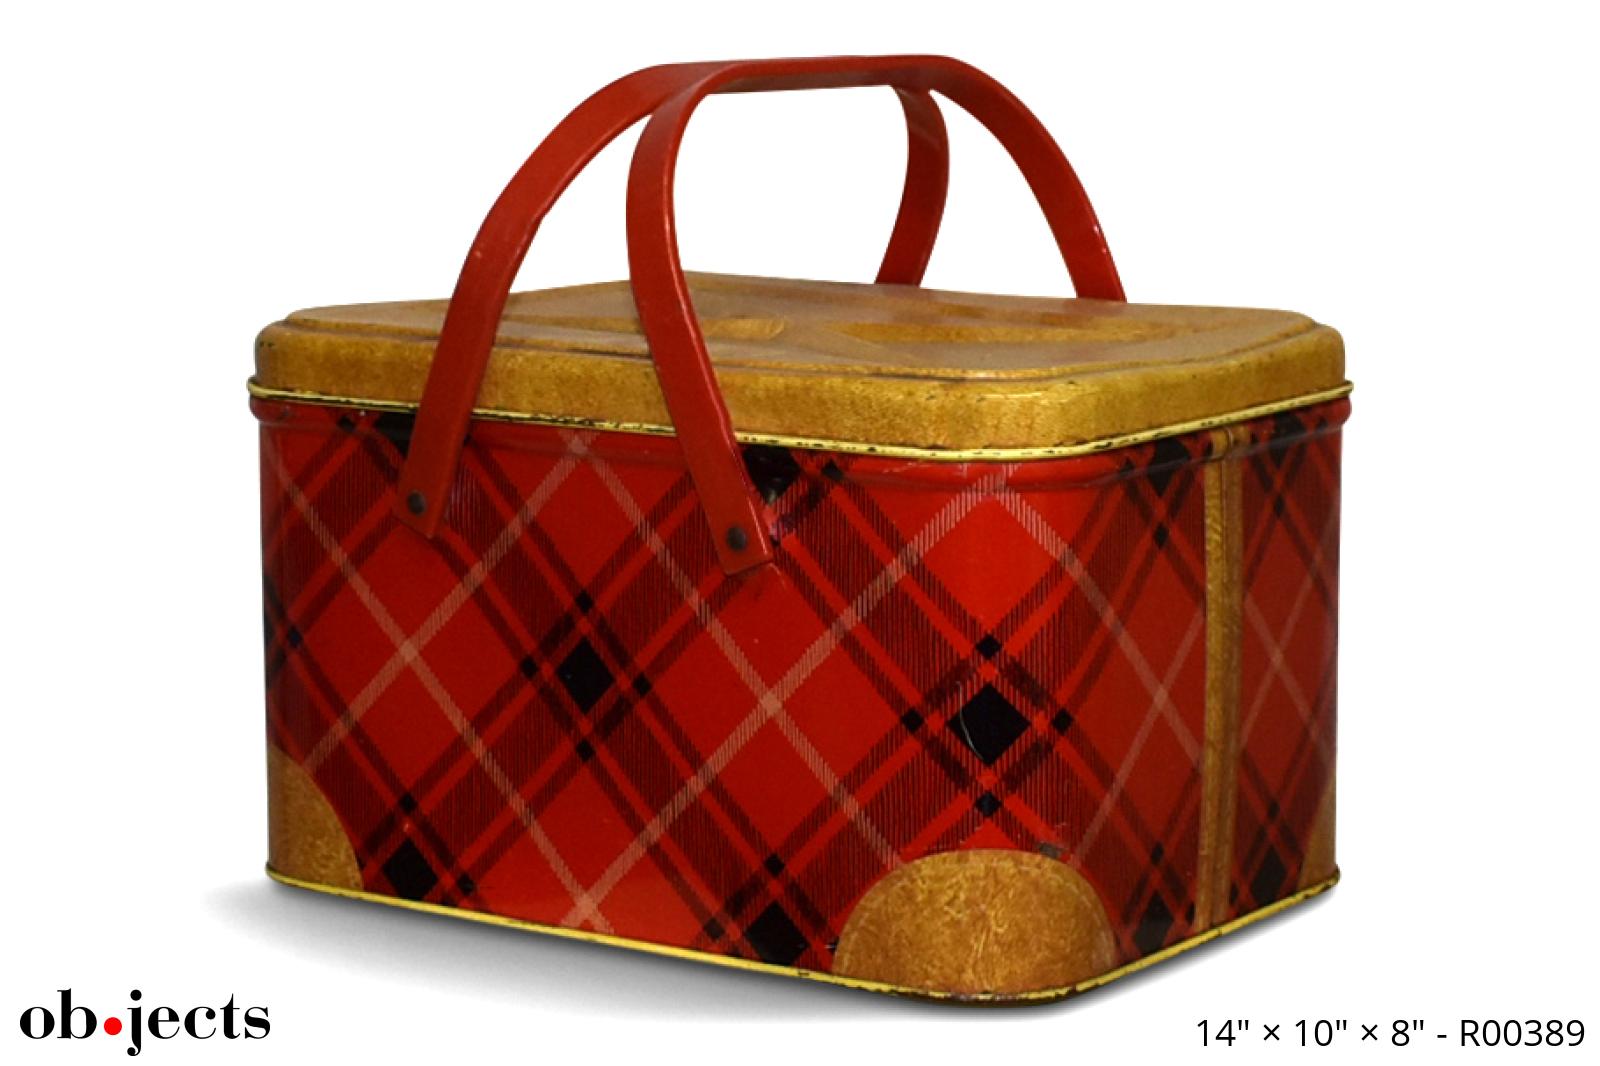 Picnic Basket Plaid Metal w/Red Handles | Ob•jects